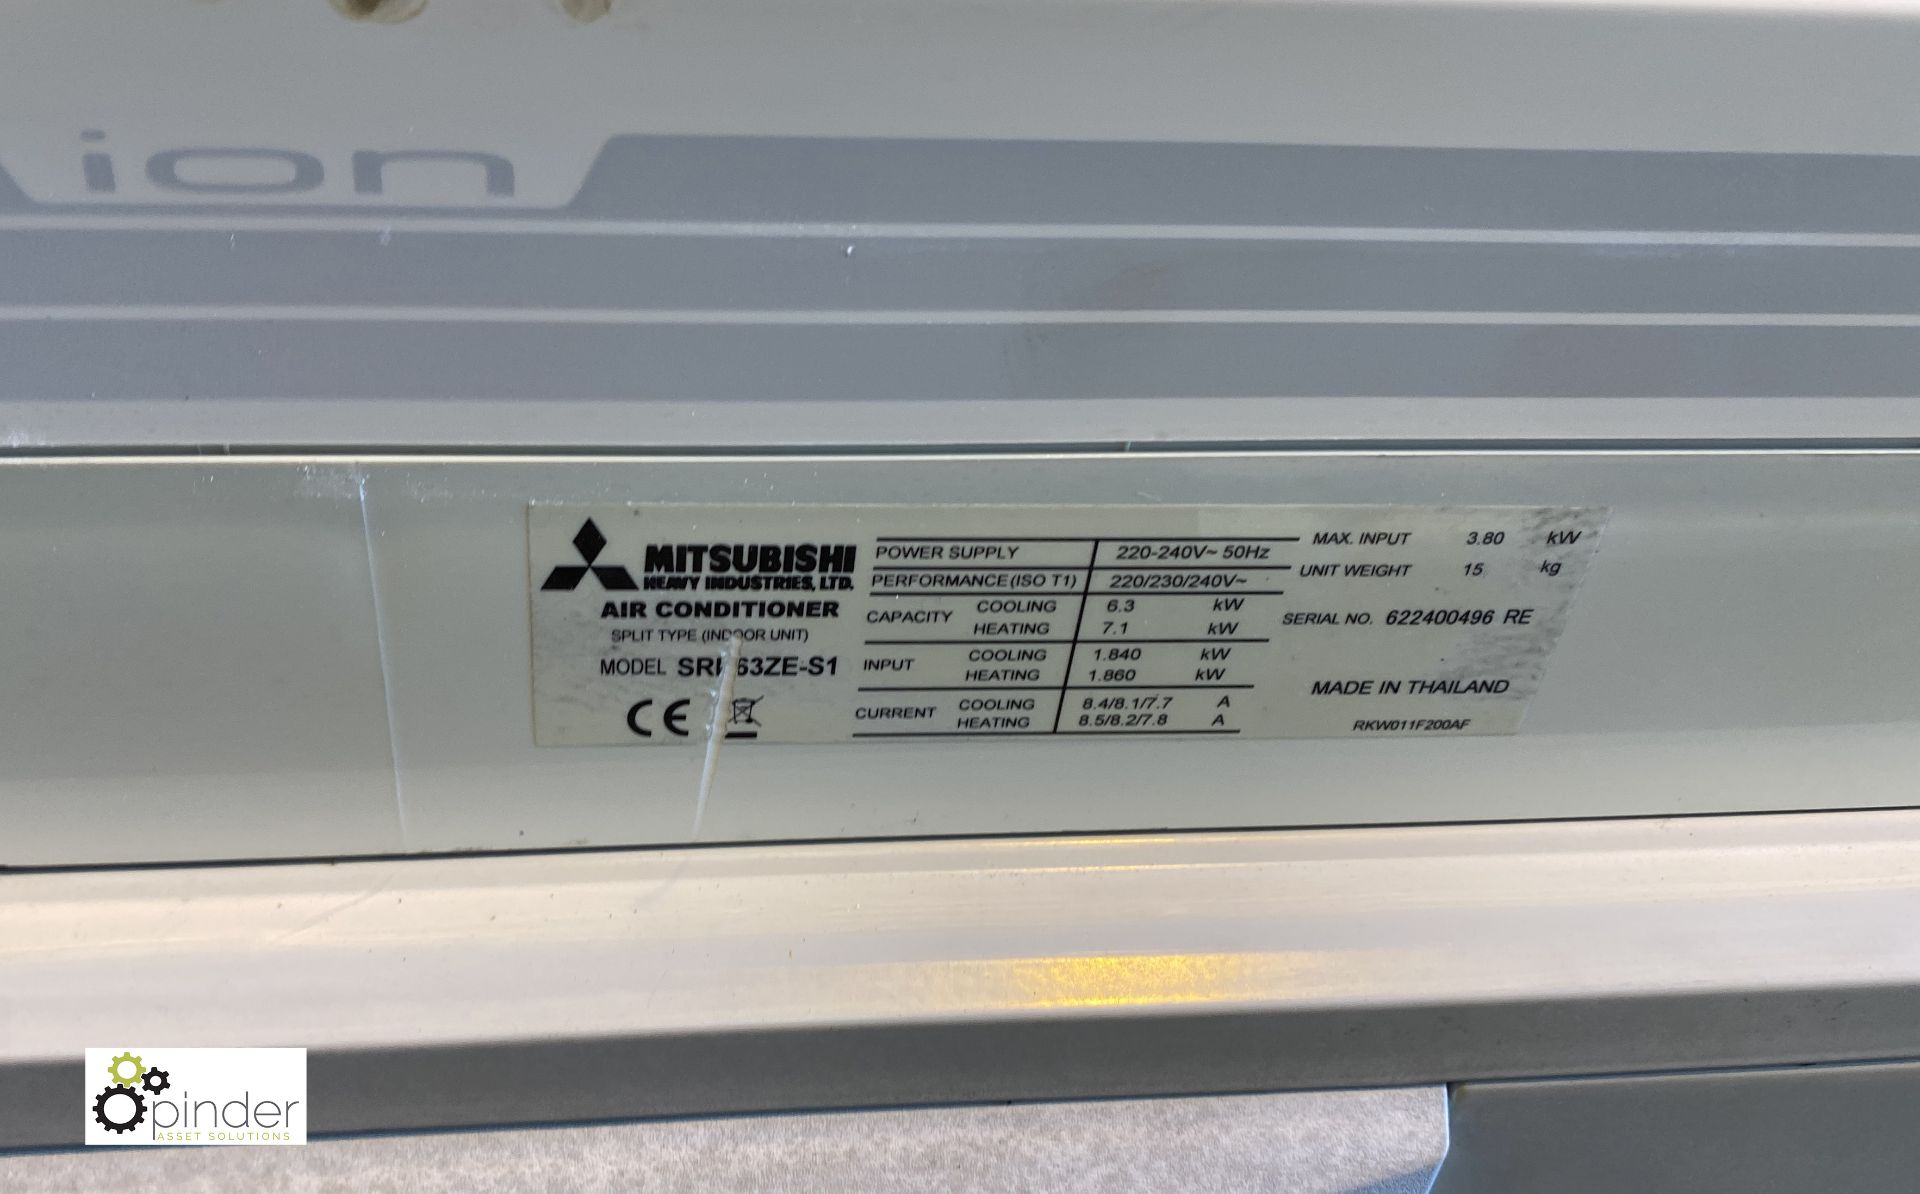 Mitsubishi SRC63ZE-S1 Air Conditioning Unit, with Mitsubishi SRK63ZE-S wall mounted inverter - Image 3 of 4